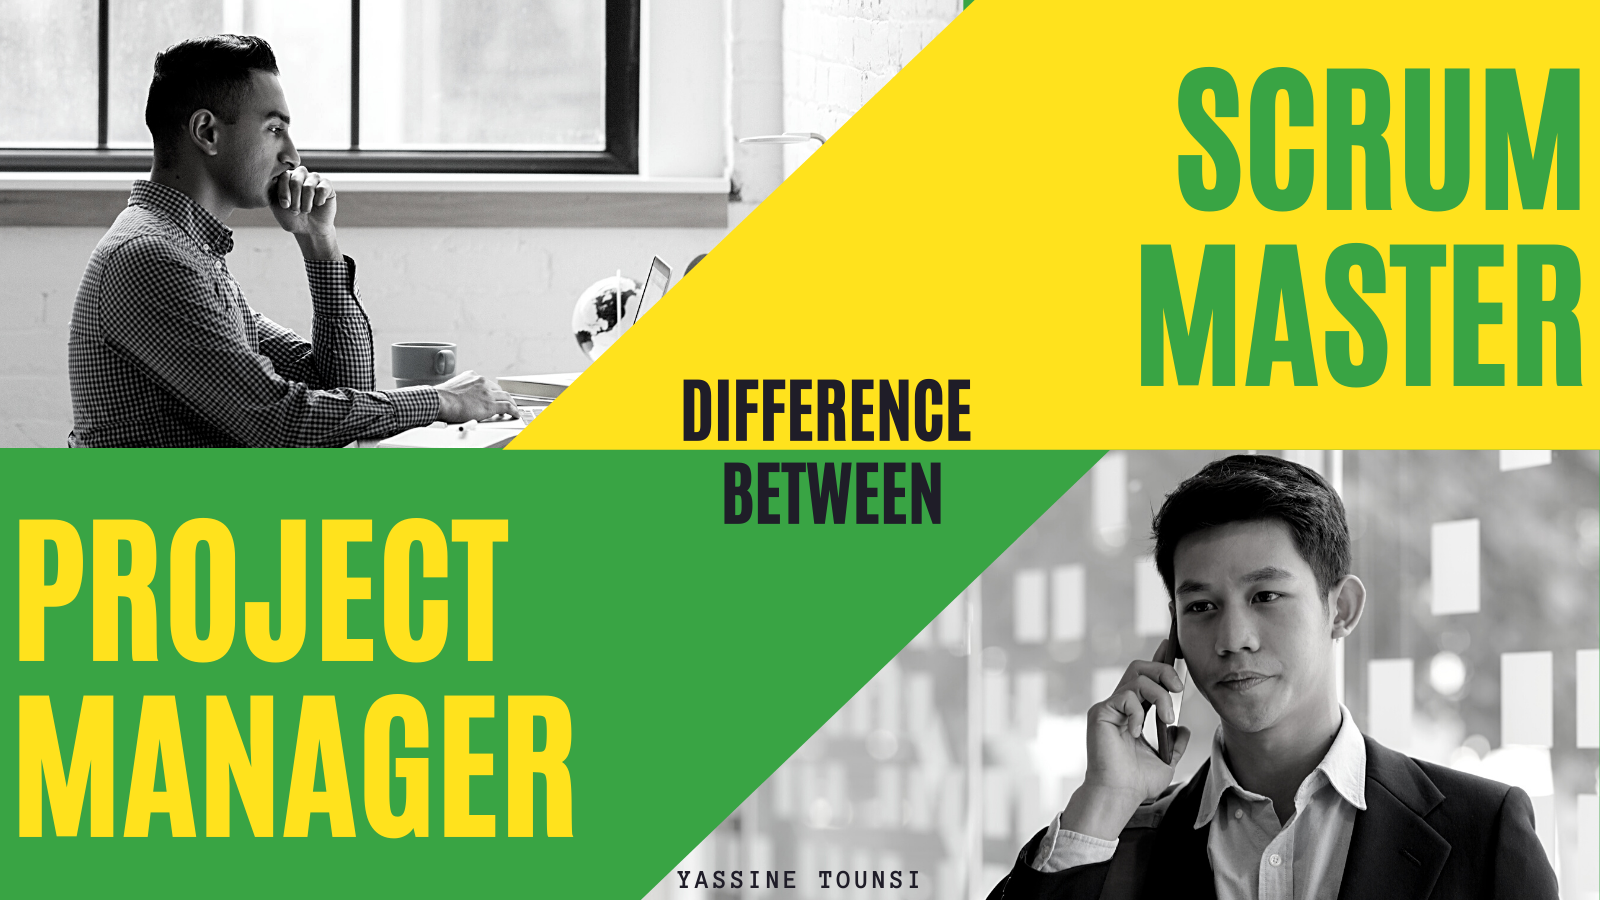 The difference between Scrum Master and Project Manager